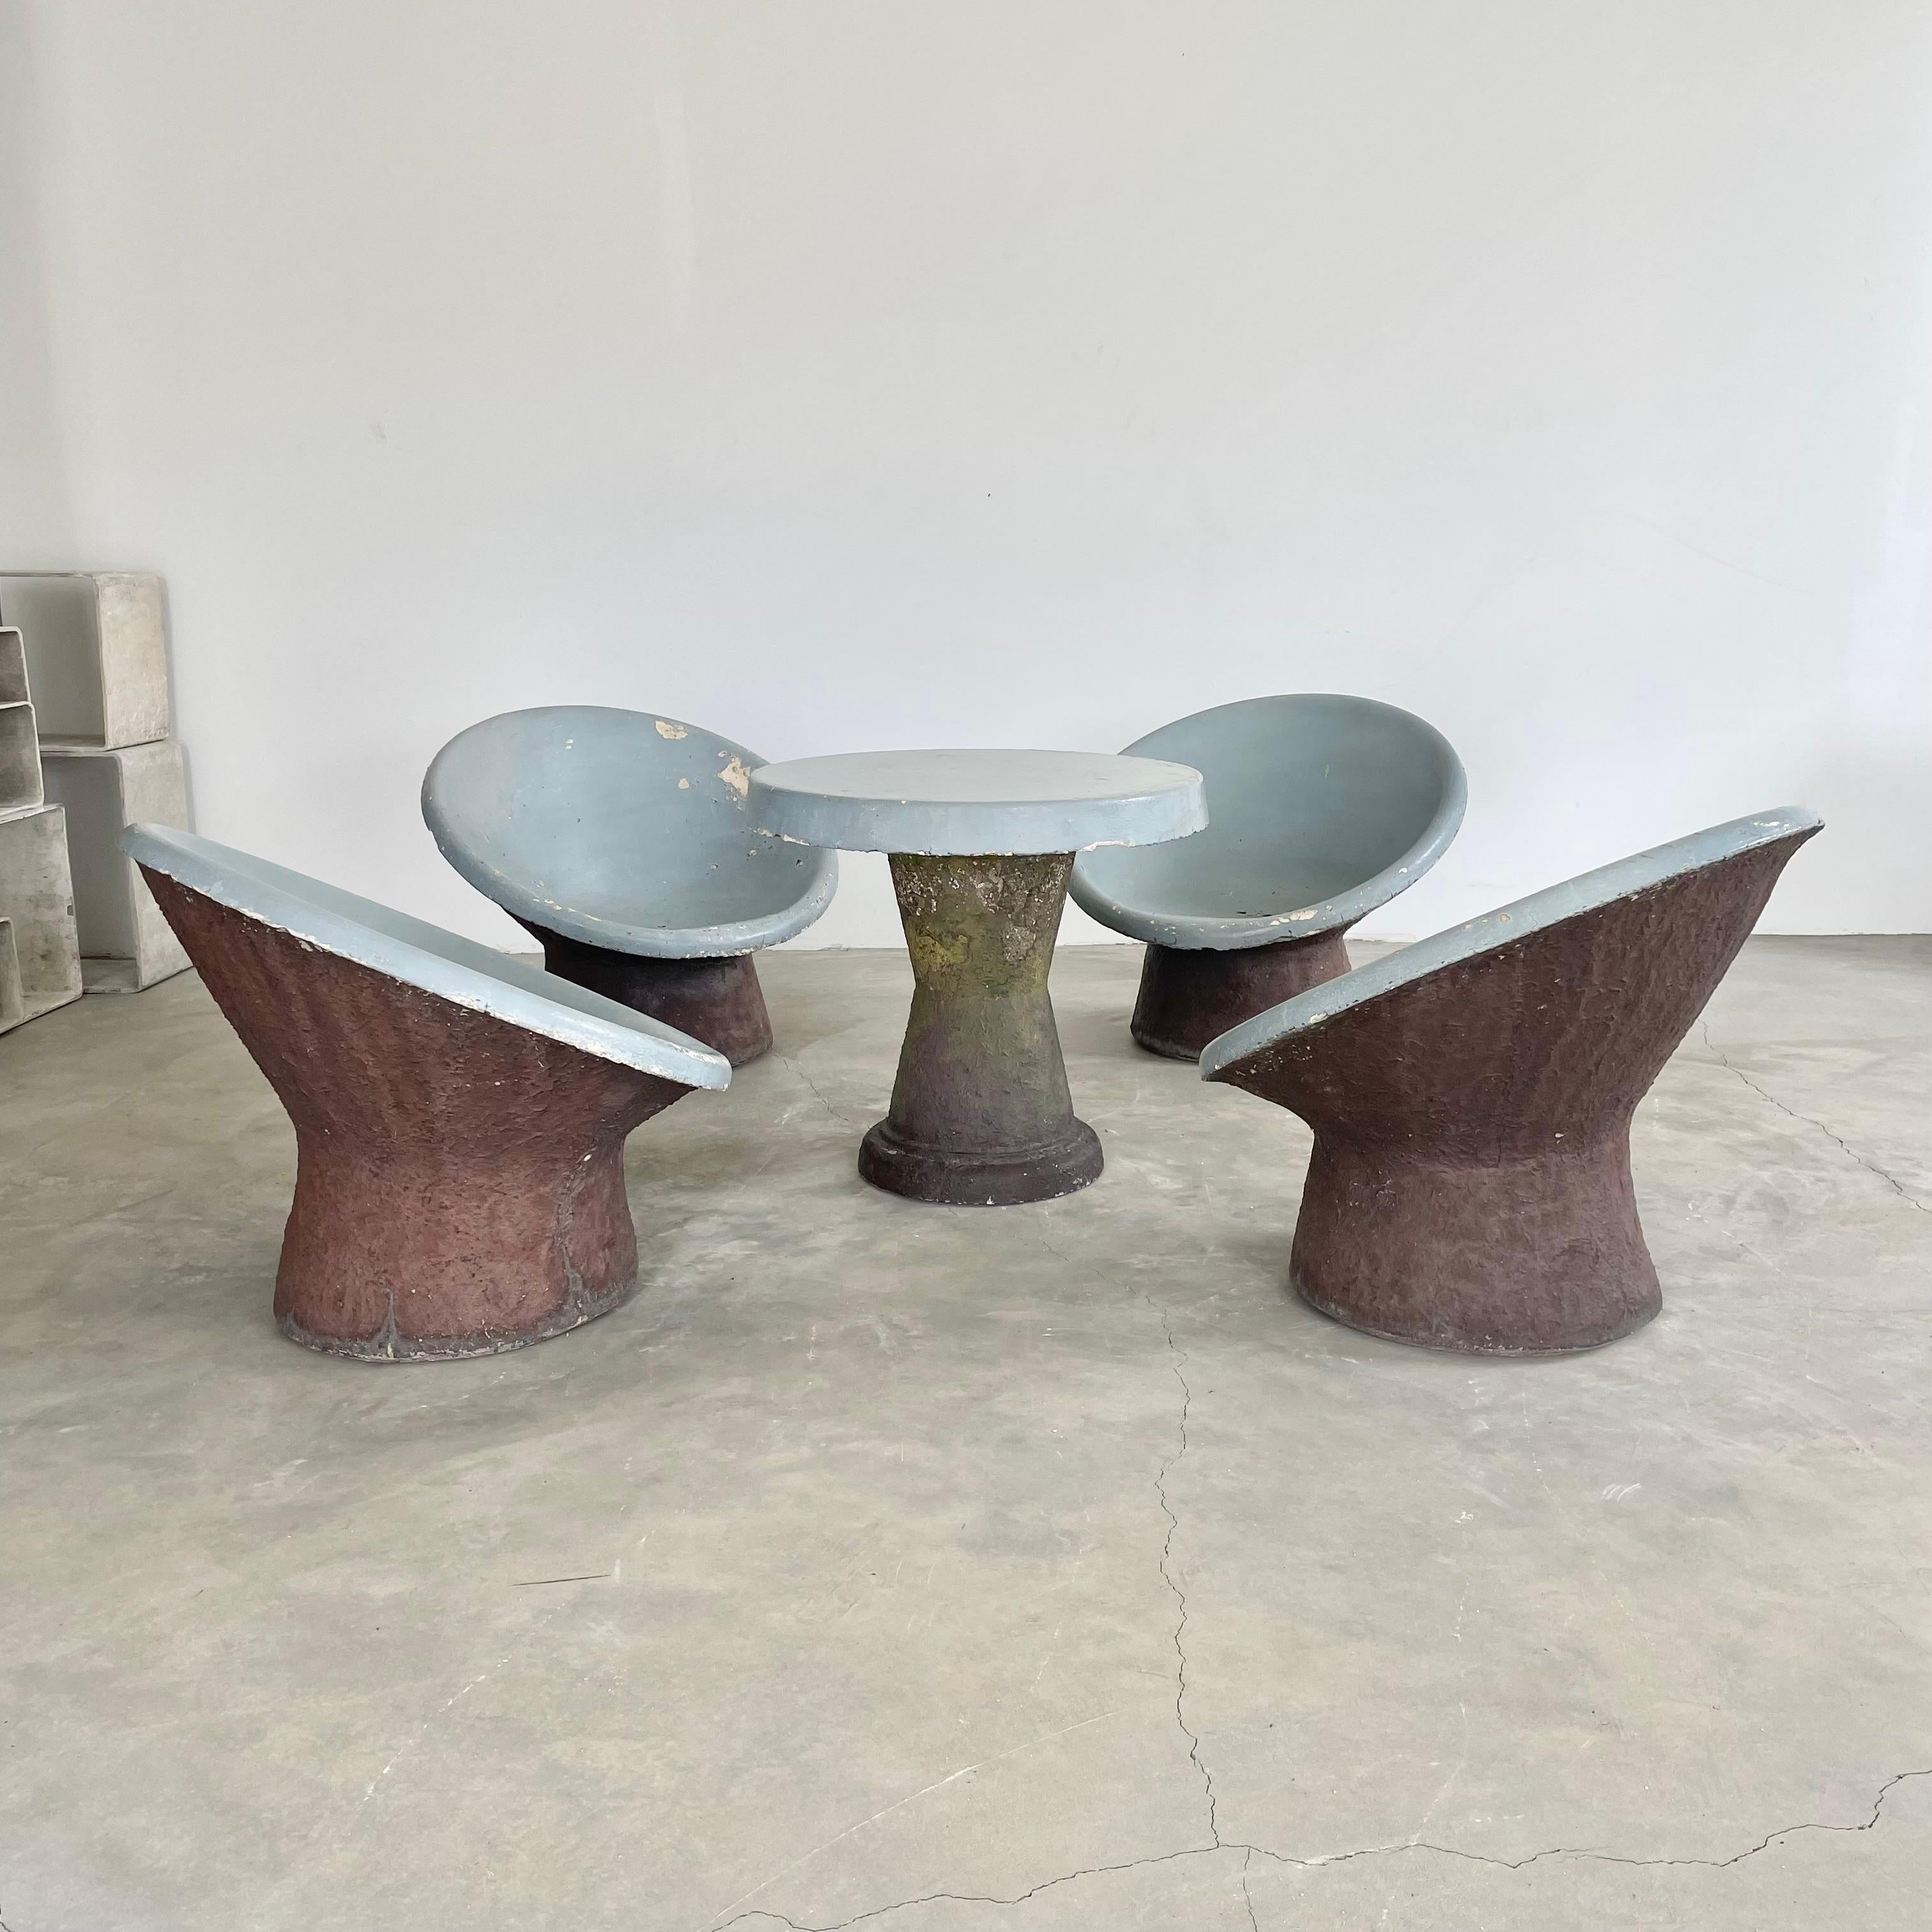 Swiss Sculptural Concrete Chairs and Table, 1960s, Switzerland For Sale